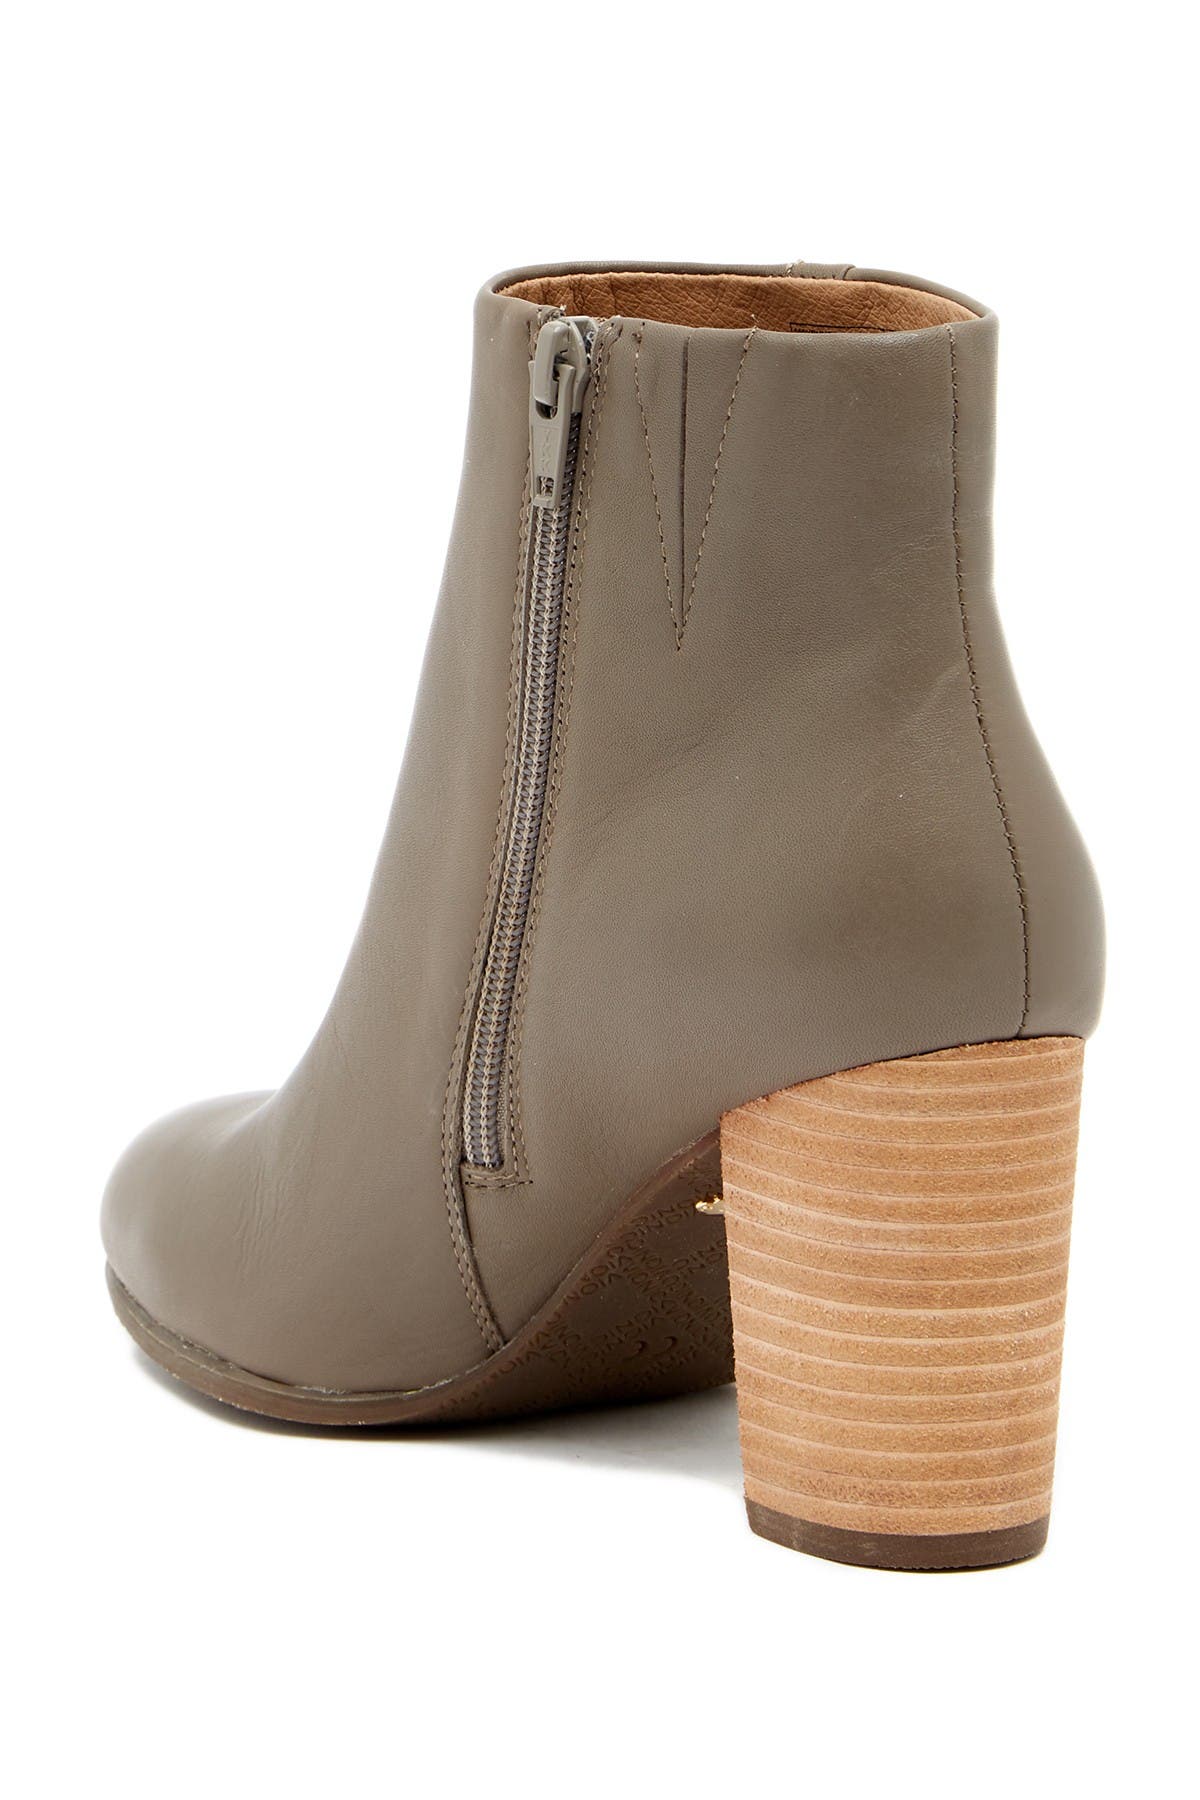 vionic kennedy ankle bootie